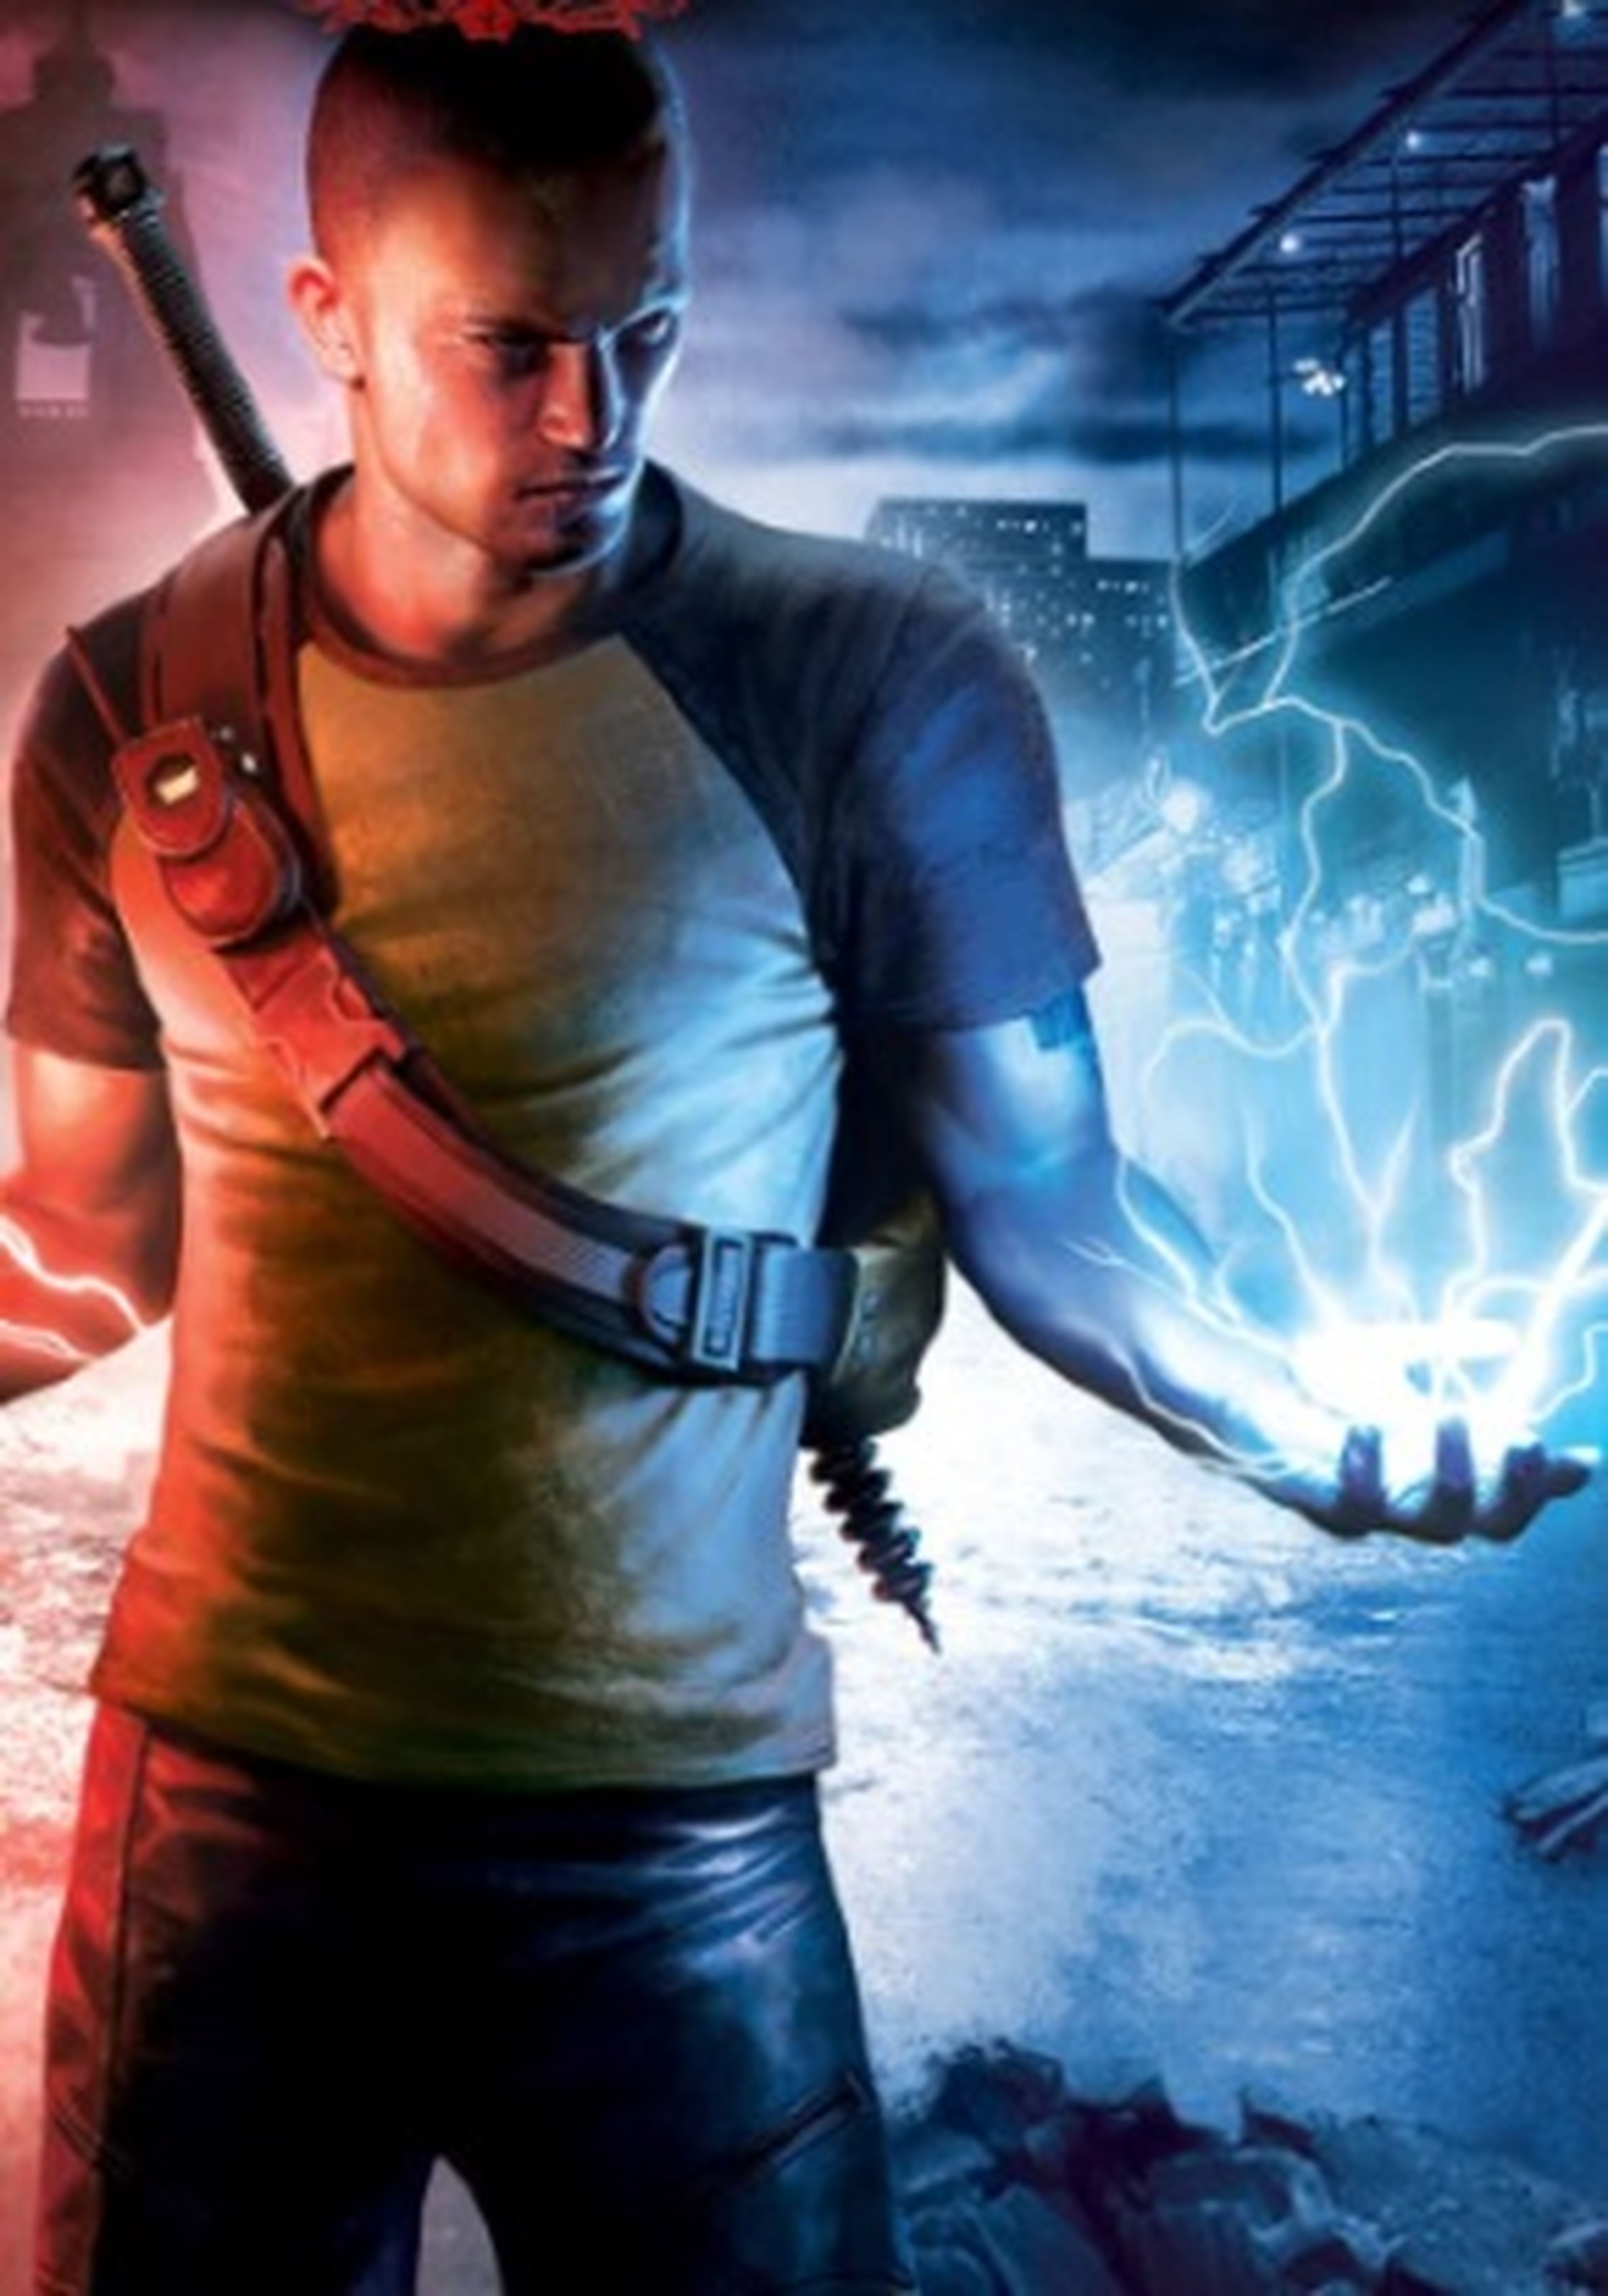 Infamous 2 cover